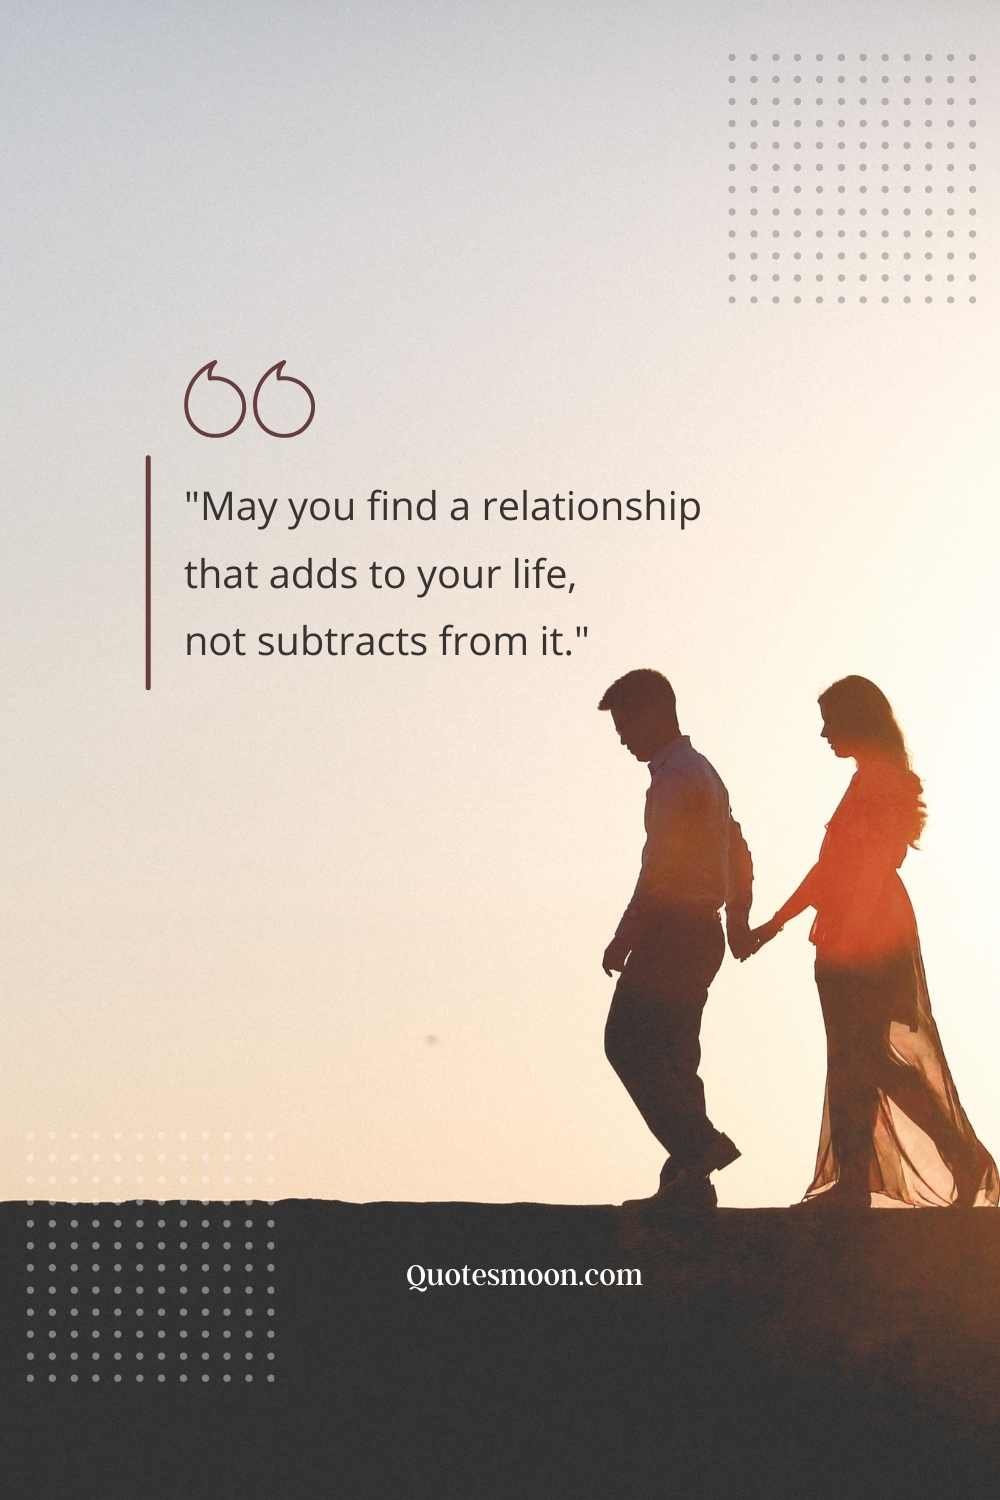 Relationship you deserve better quotes for her images